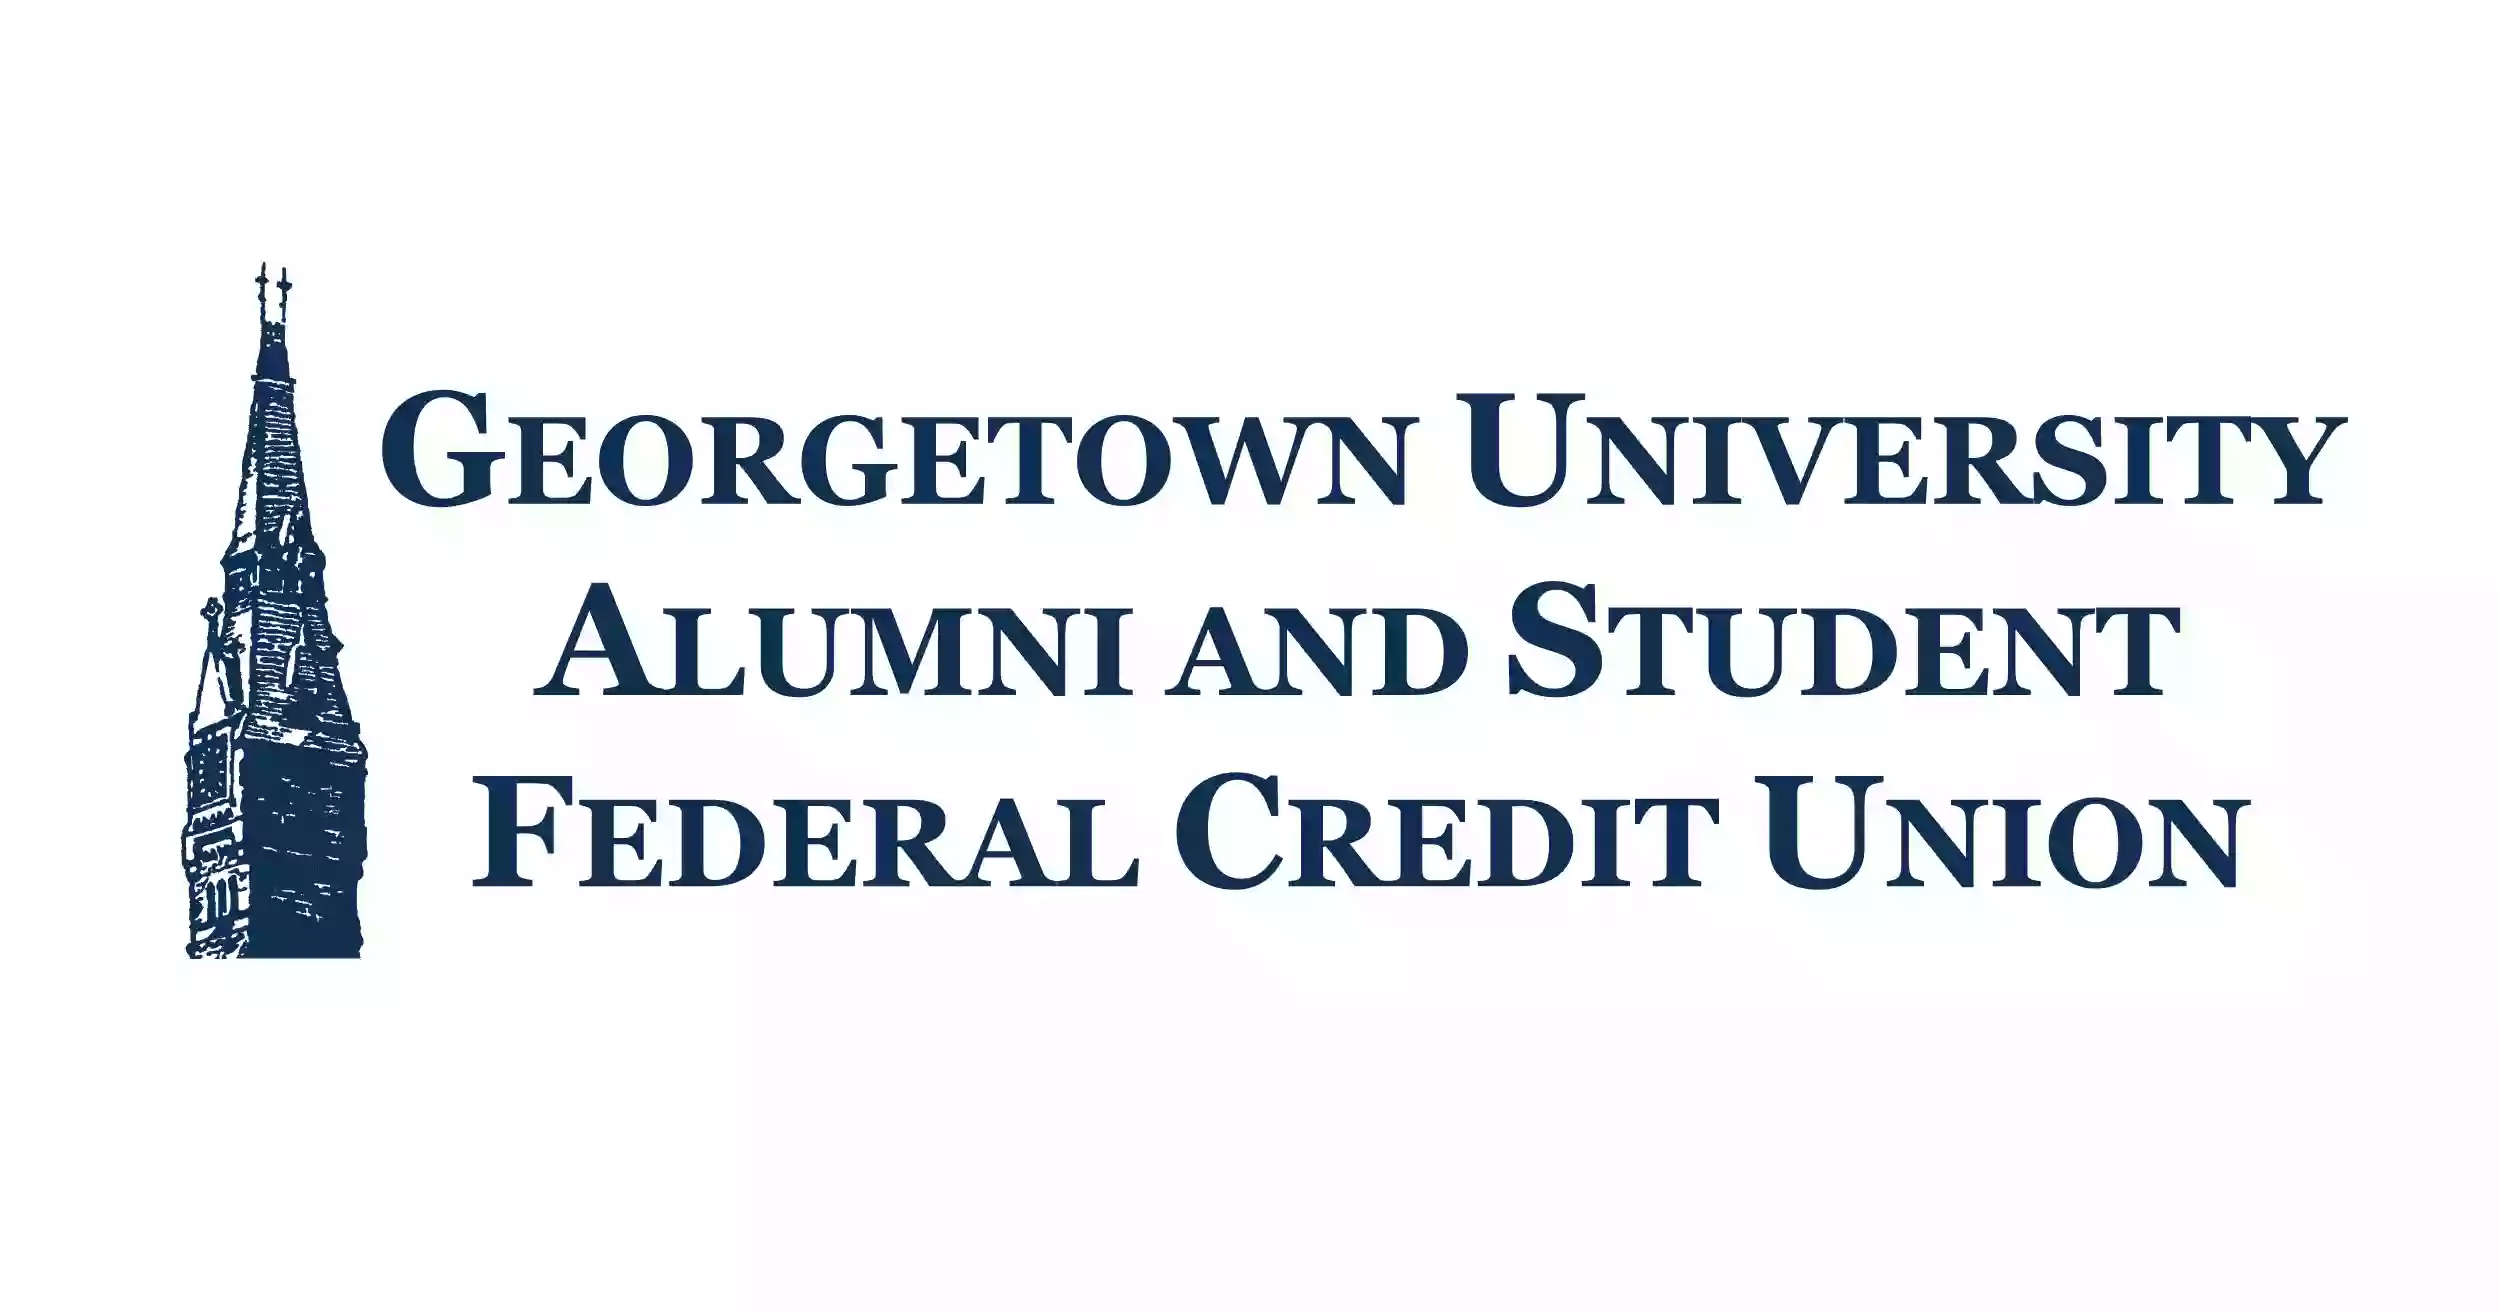 Georgetown University Alumni and Student Federal Credit Union